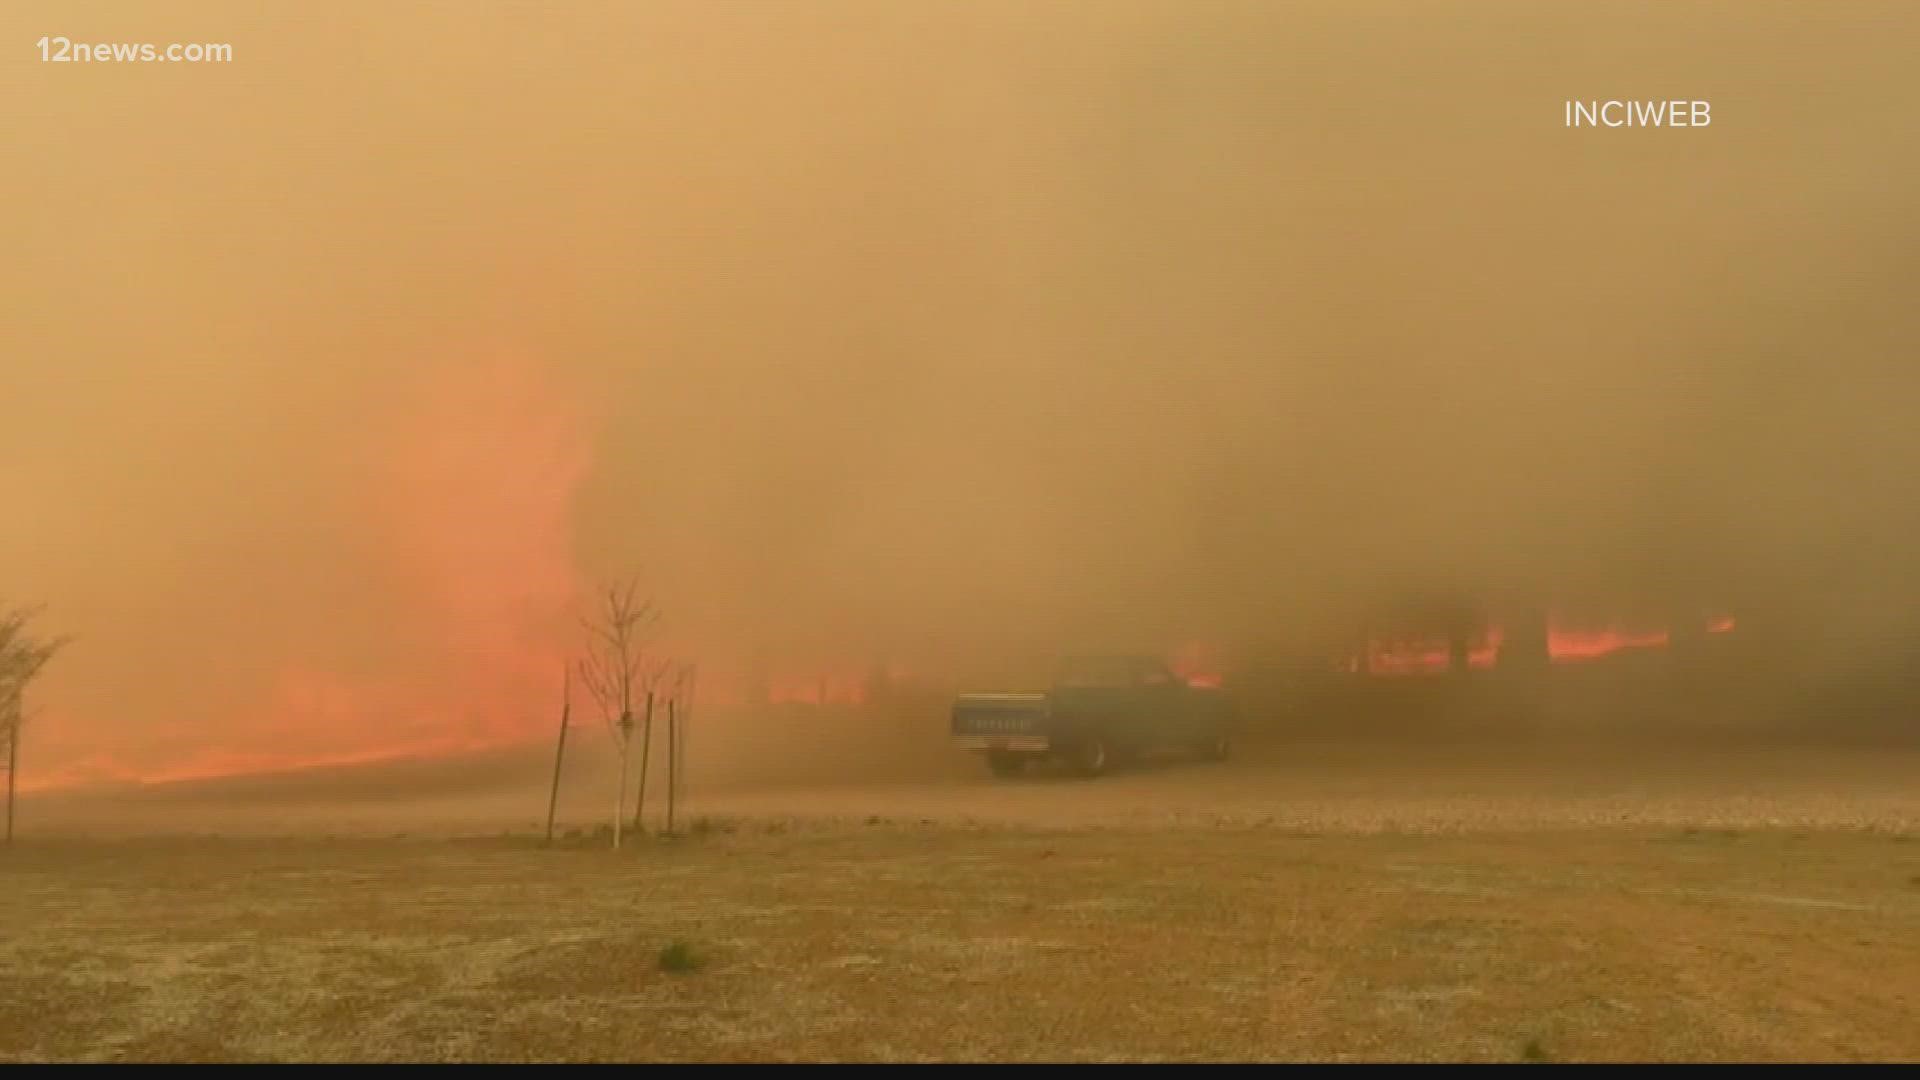 Some residents near Flagstaff have been ordered to evacuate as the wildfire has exploded to more than 6,000 acres.